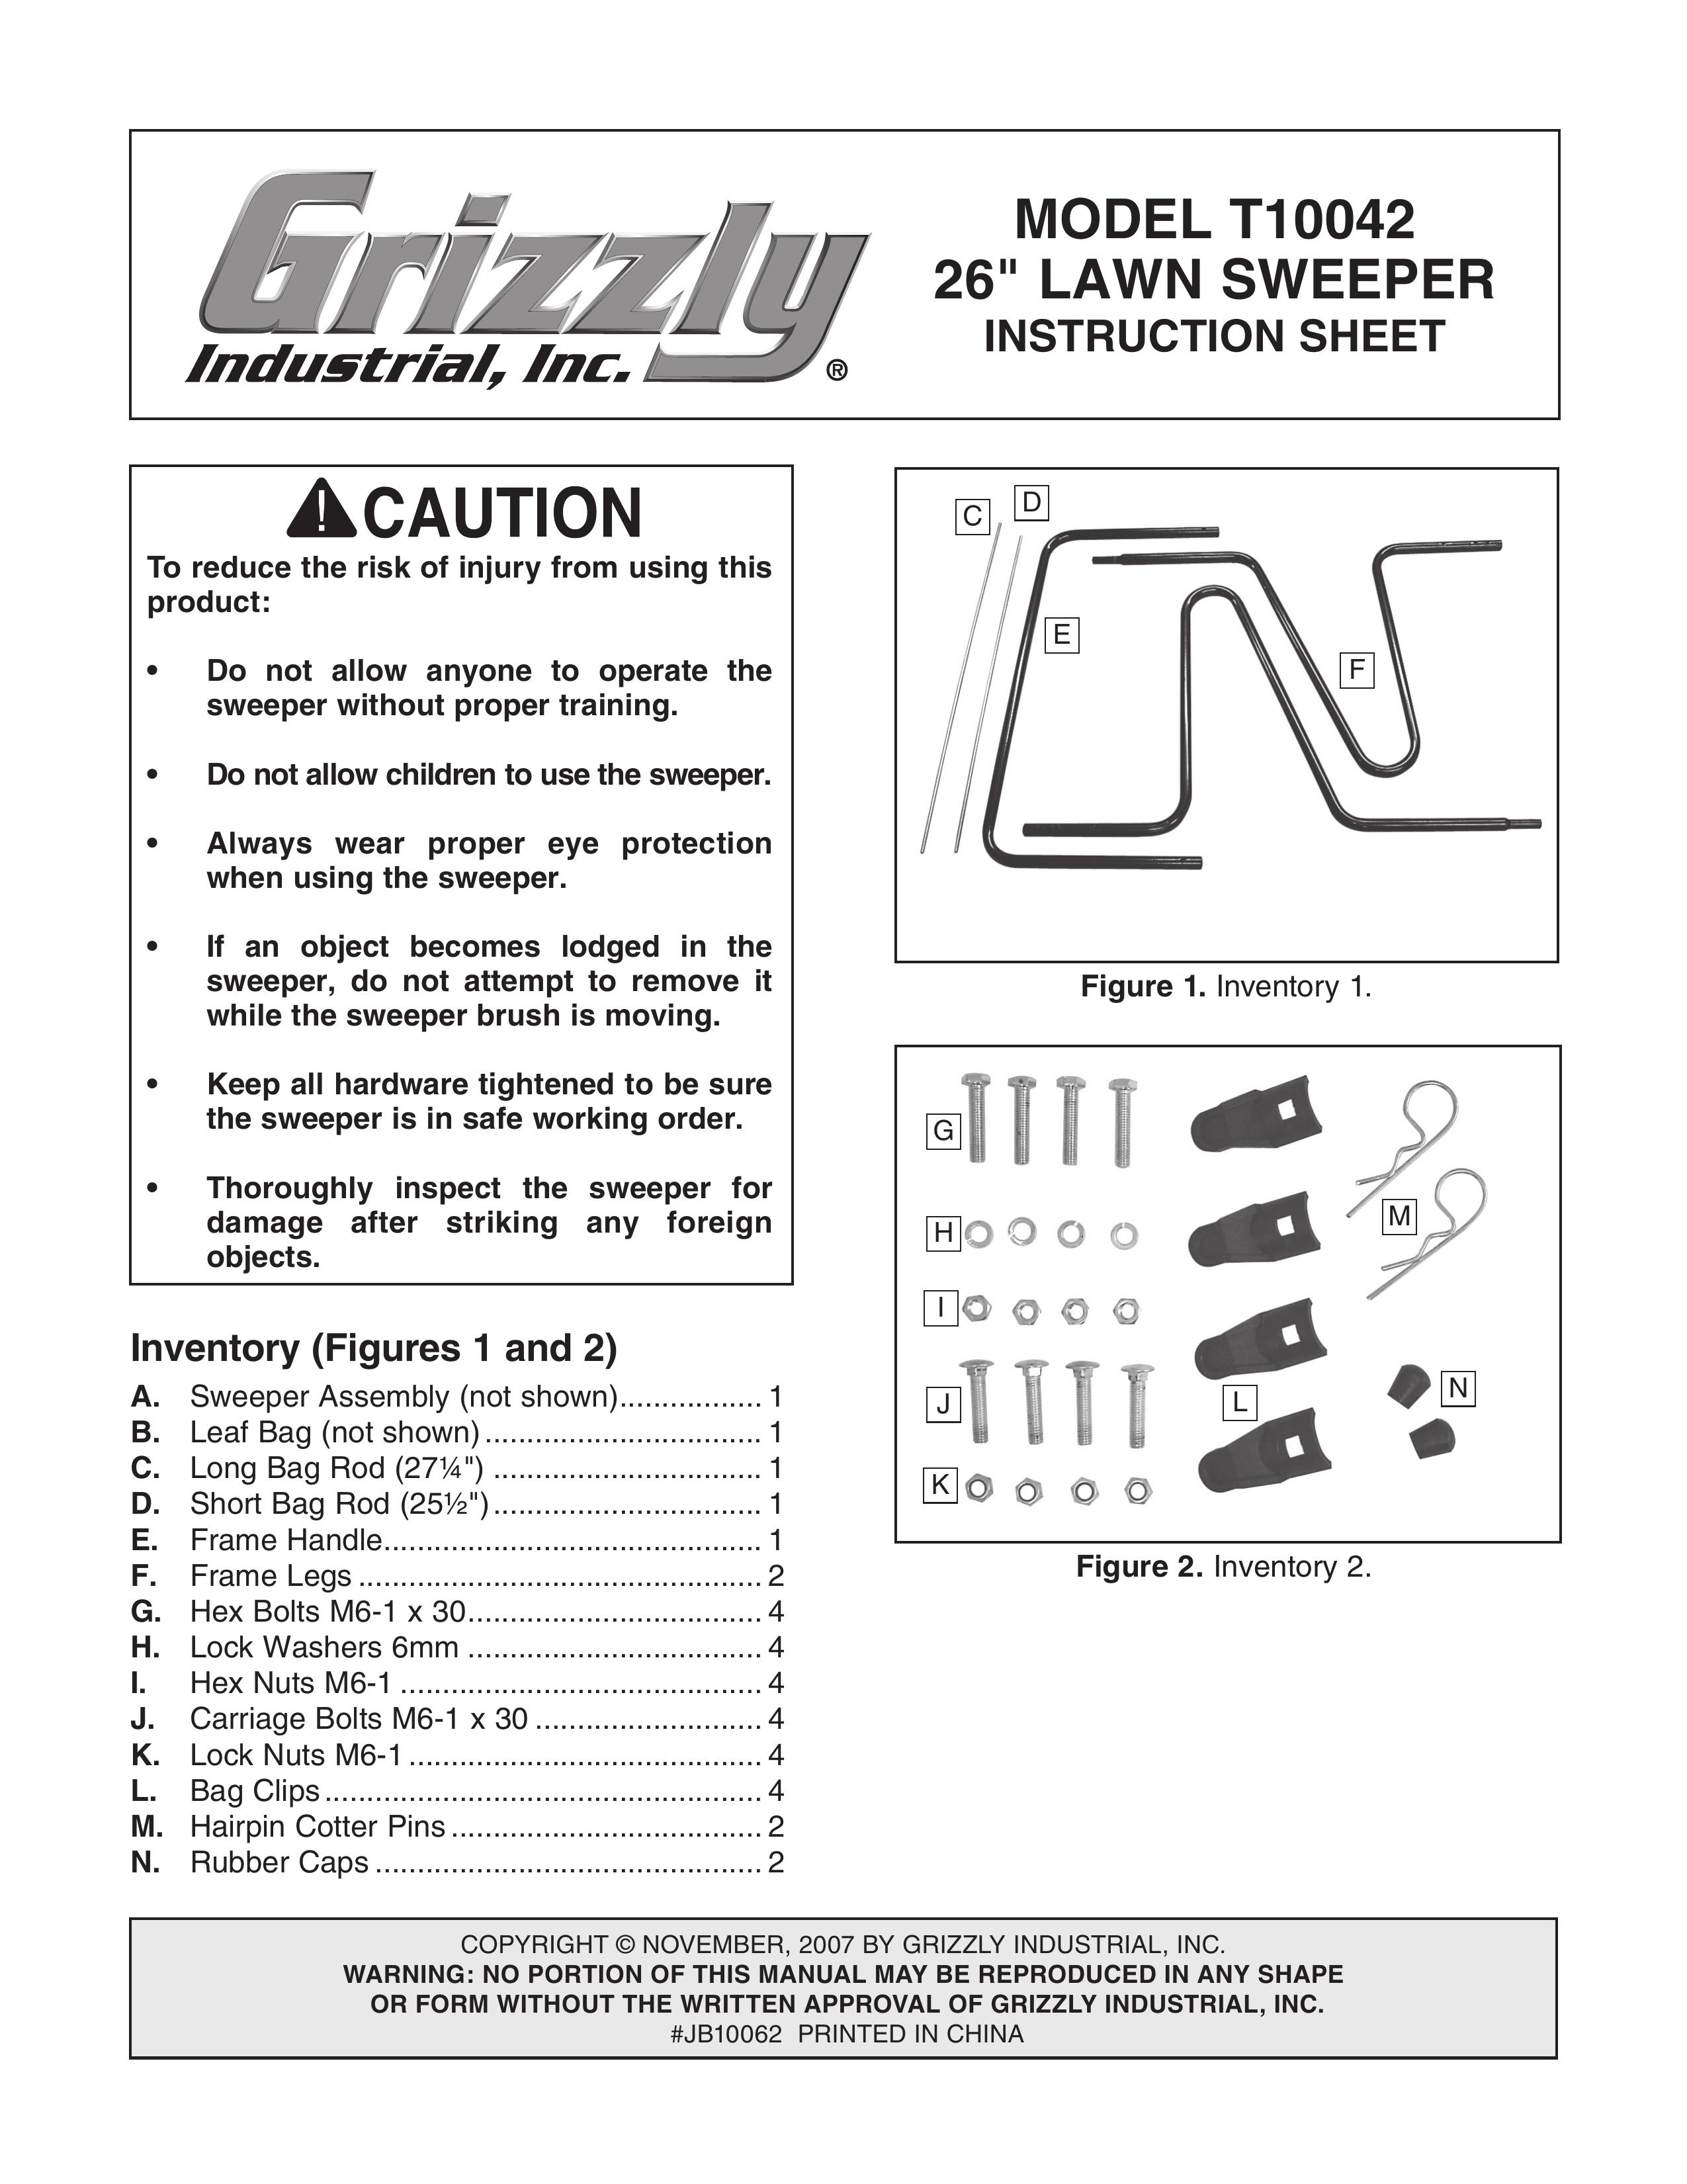 Grizzly T10042 Lawn Sweeper User Manual